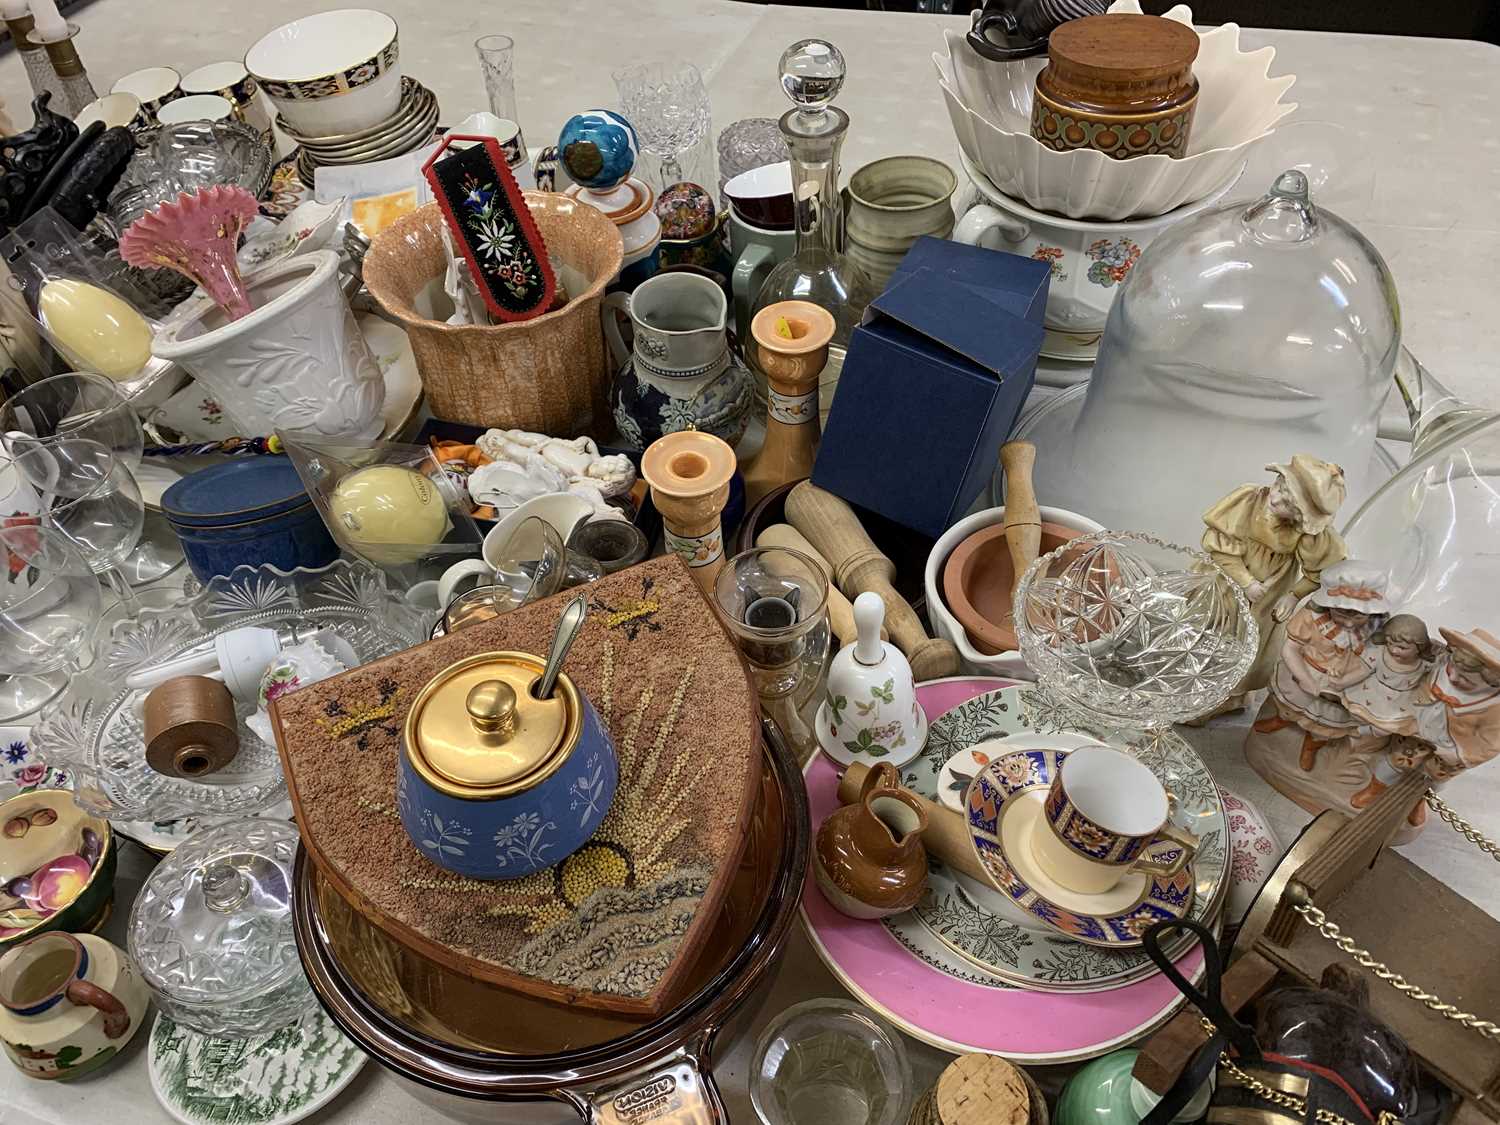 DECORATIVE GLASSWARE, AYNSLEY & OTHER TEAWARE, ornamental figurines and utility ware, a good mixed